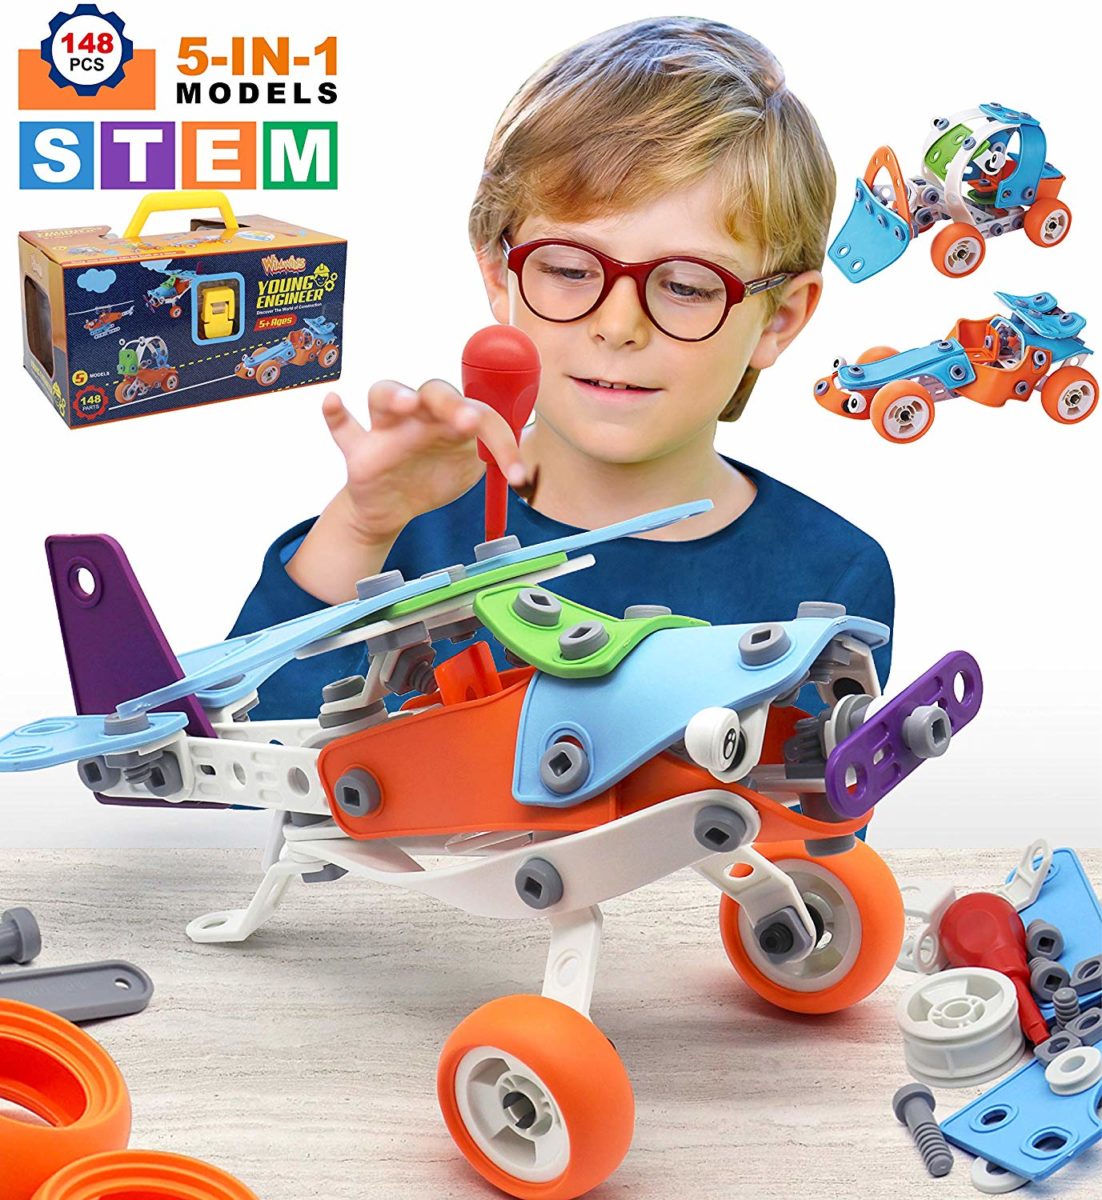 STEM Building Set for Boys - Top Toys and Gifts for Six Year Old Boys 1